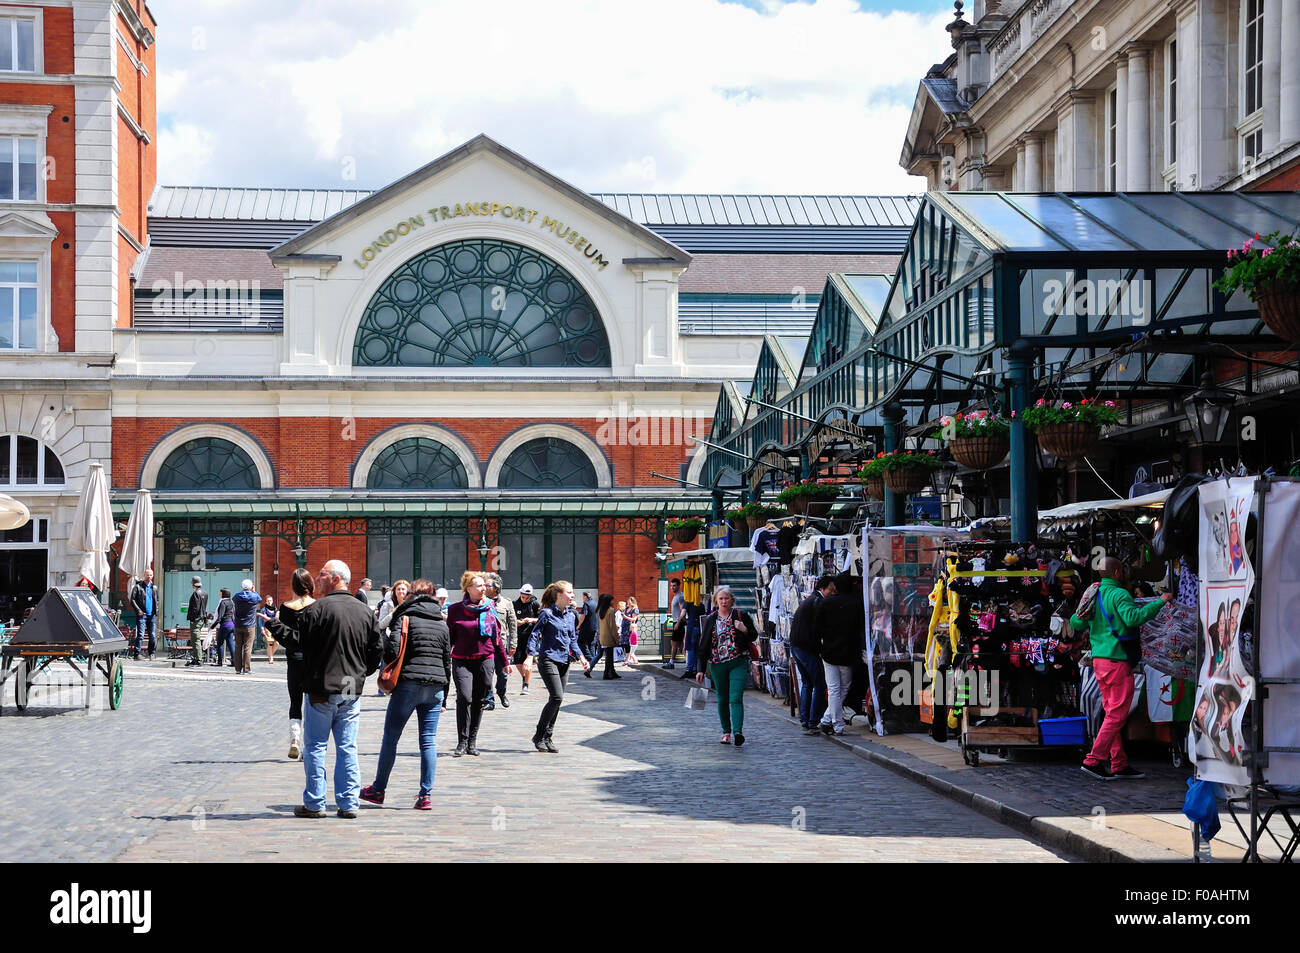 London Transport Museum, Covent Garden Market, Covent Garden, City of Westminster, London, England, United Kingdom Stock Photo